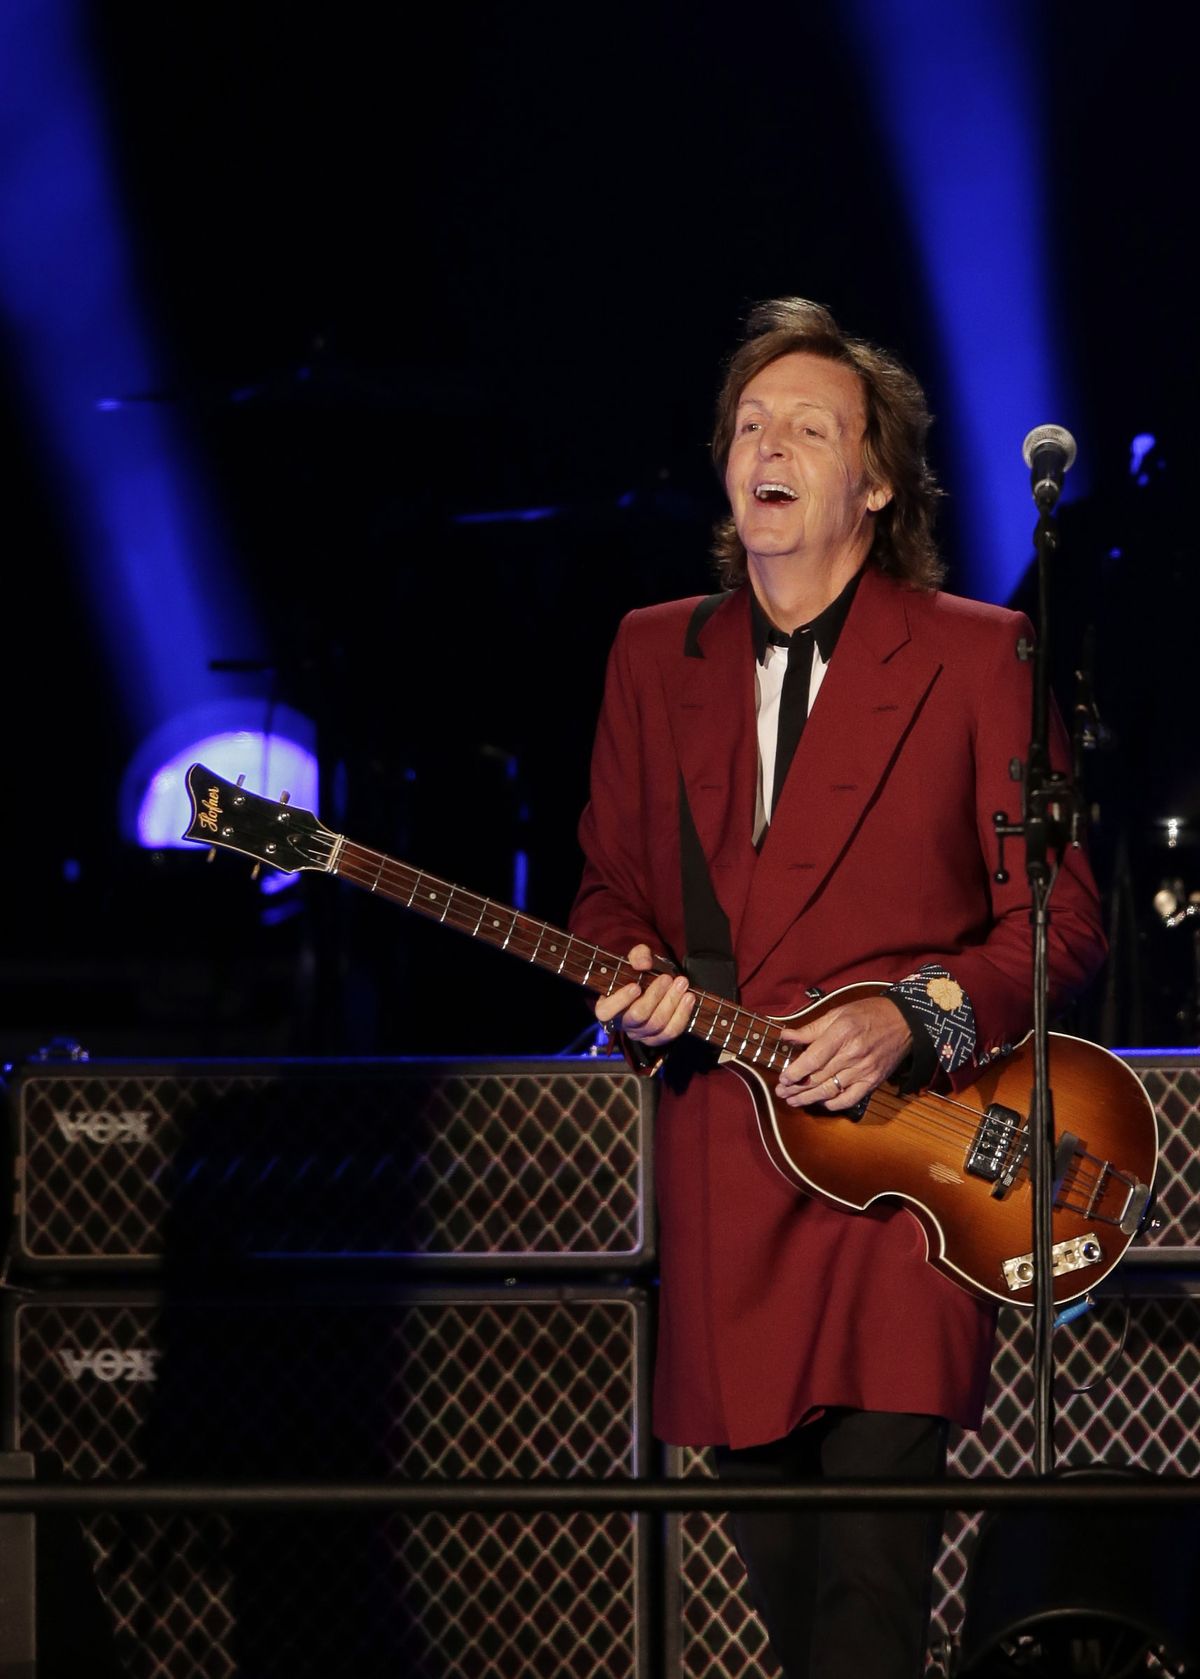 Paul McCartney performs at farewell to San Francisco’s Candlestick Park on Thursday. (Associated Press)